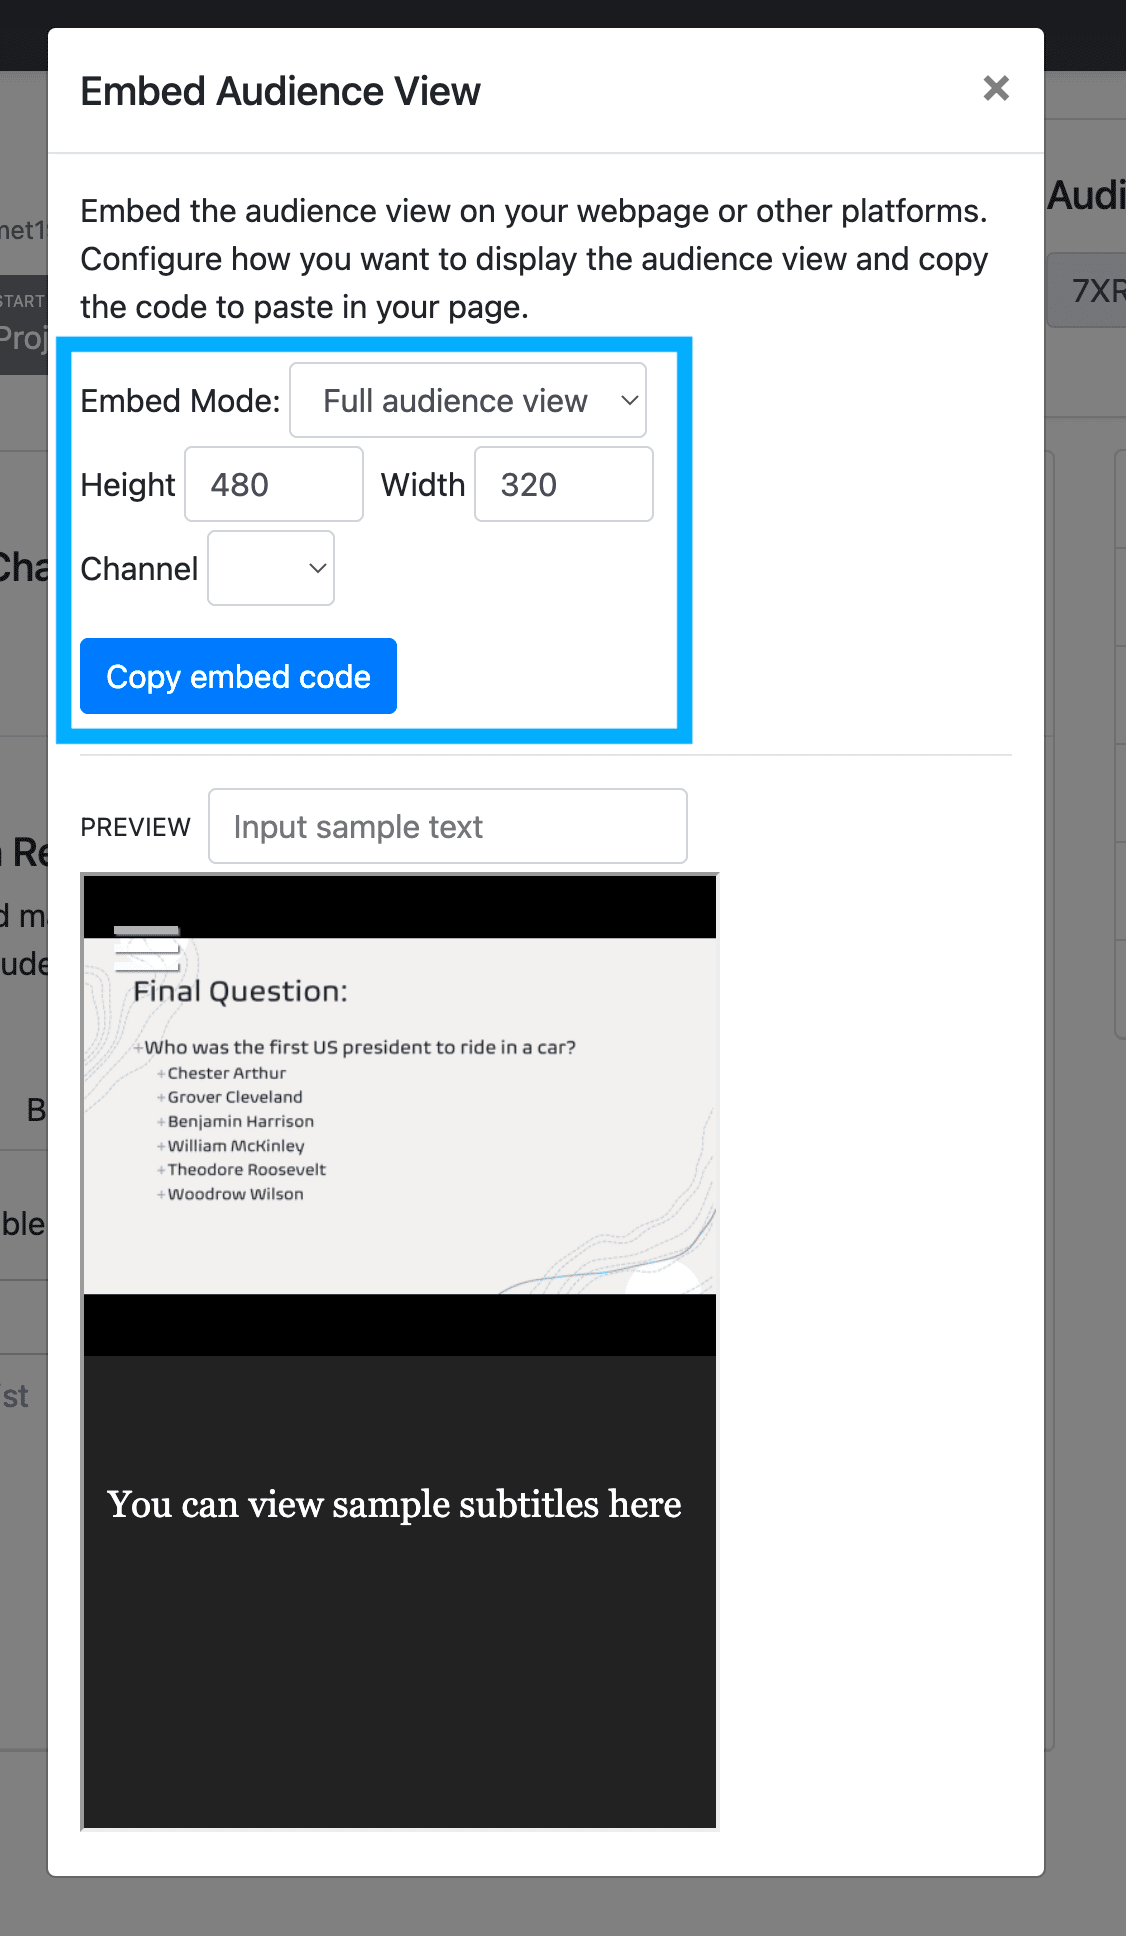 A screenshot of the "Embed Audience View" configuration modal settings for the Full audience view.